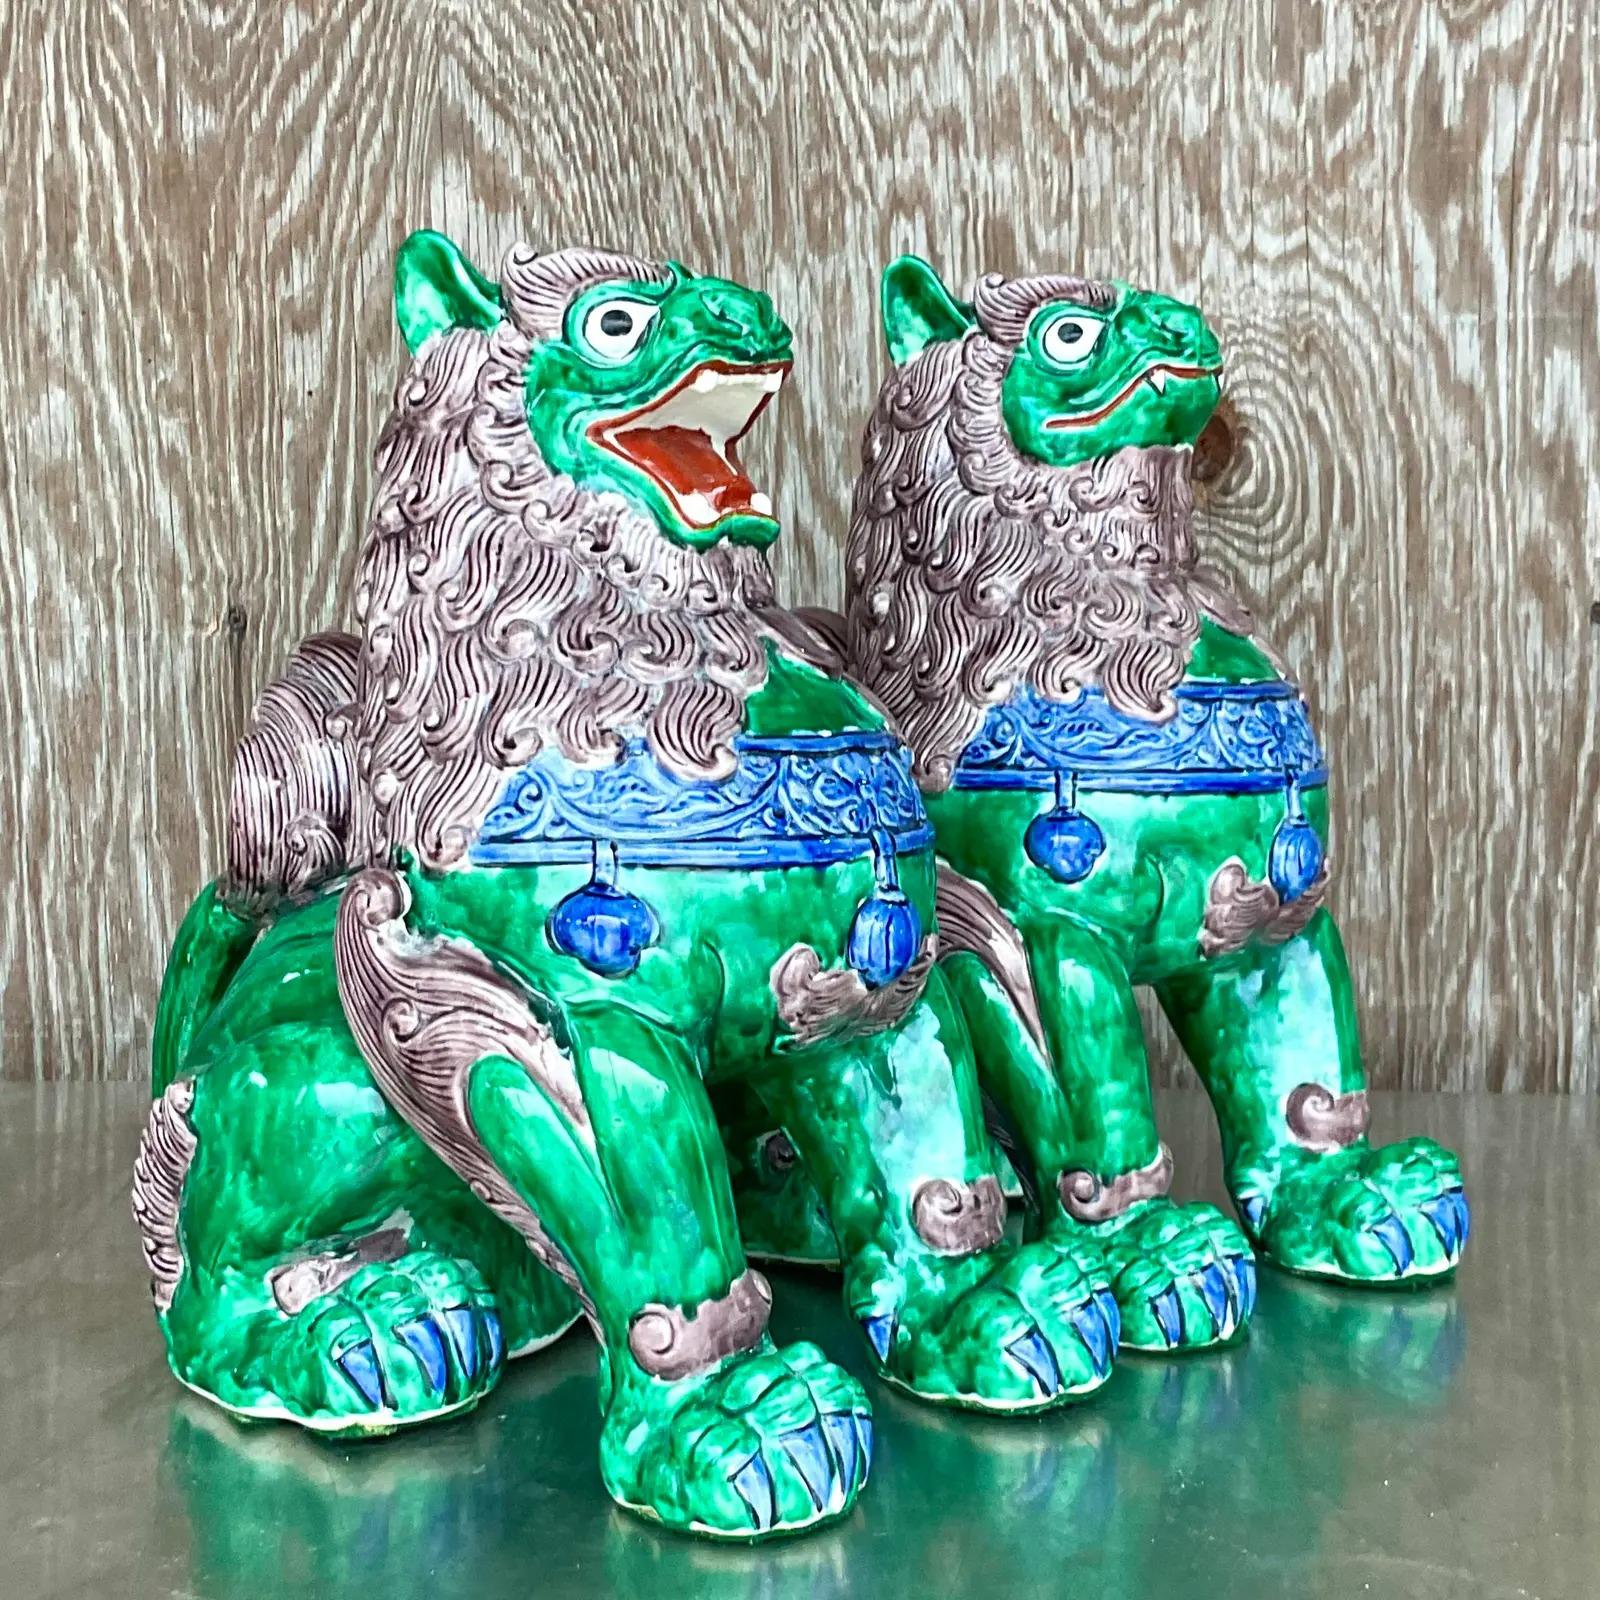 Vintage Asian Glazed Ceramic Foo Dogs - a Pair For Sale 2